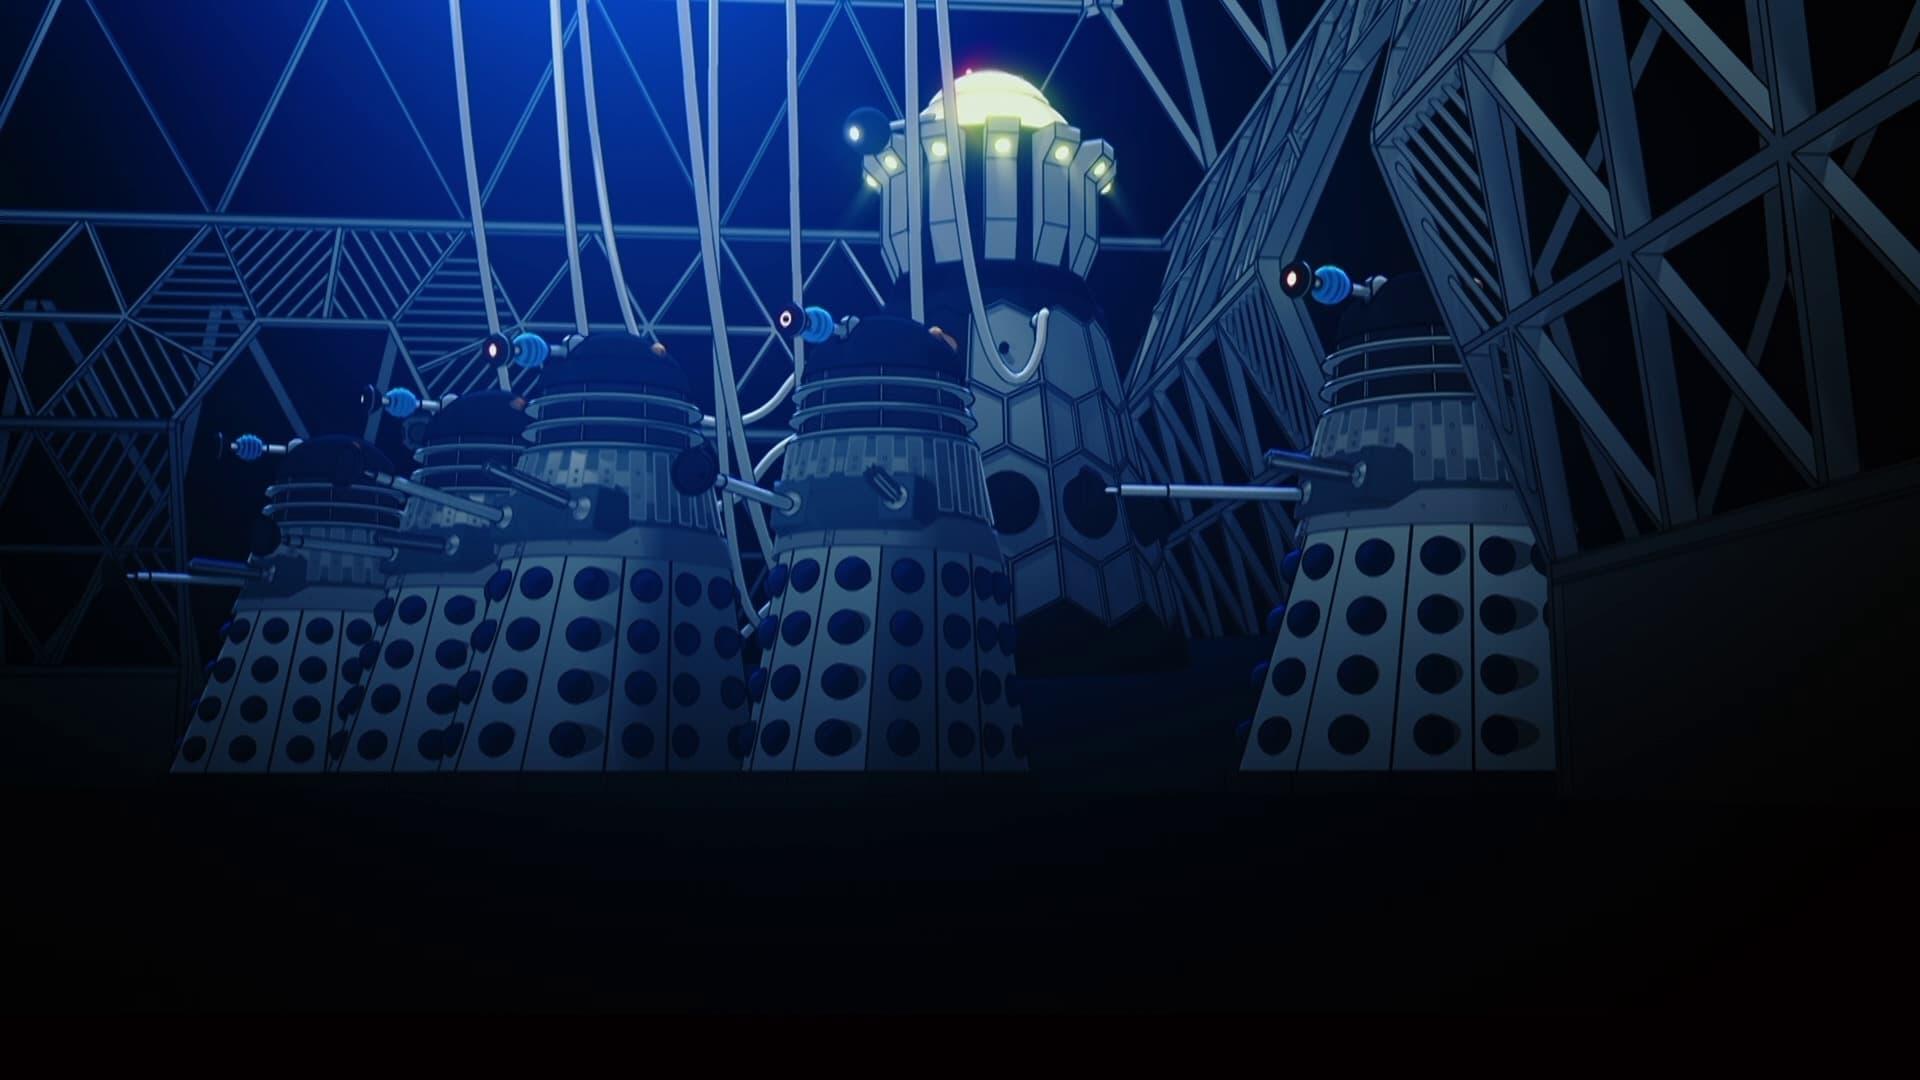 Doctor Who: The Evil of the Daleks backdrop